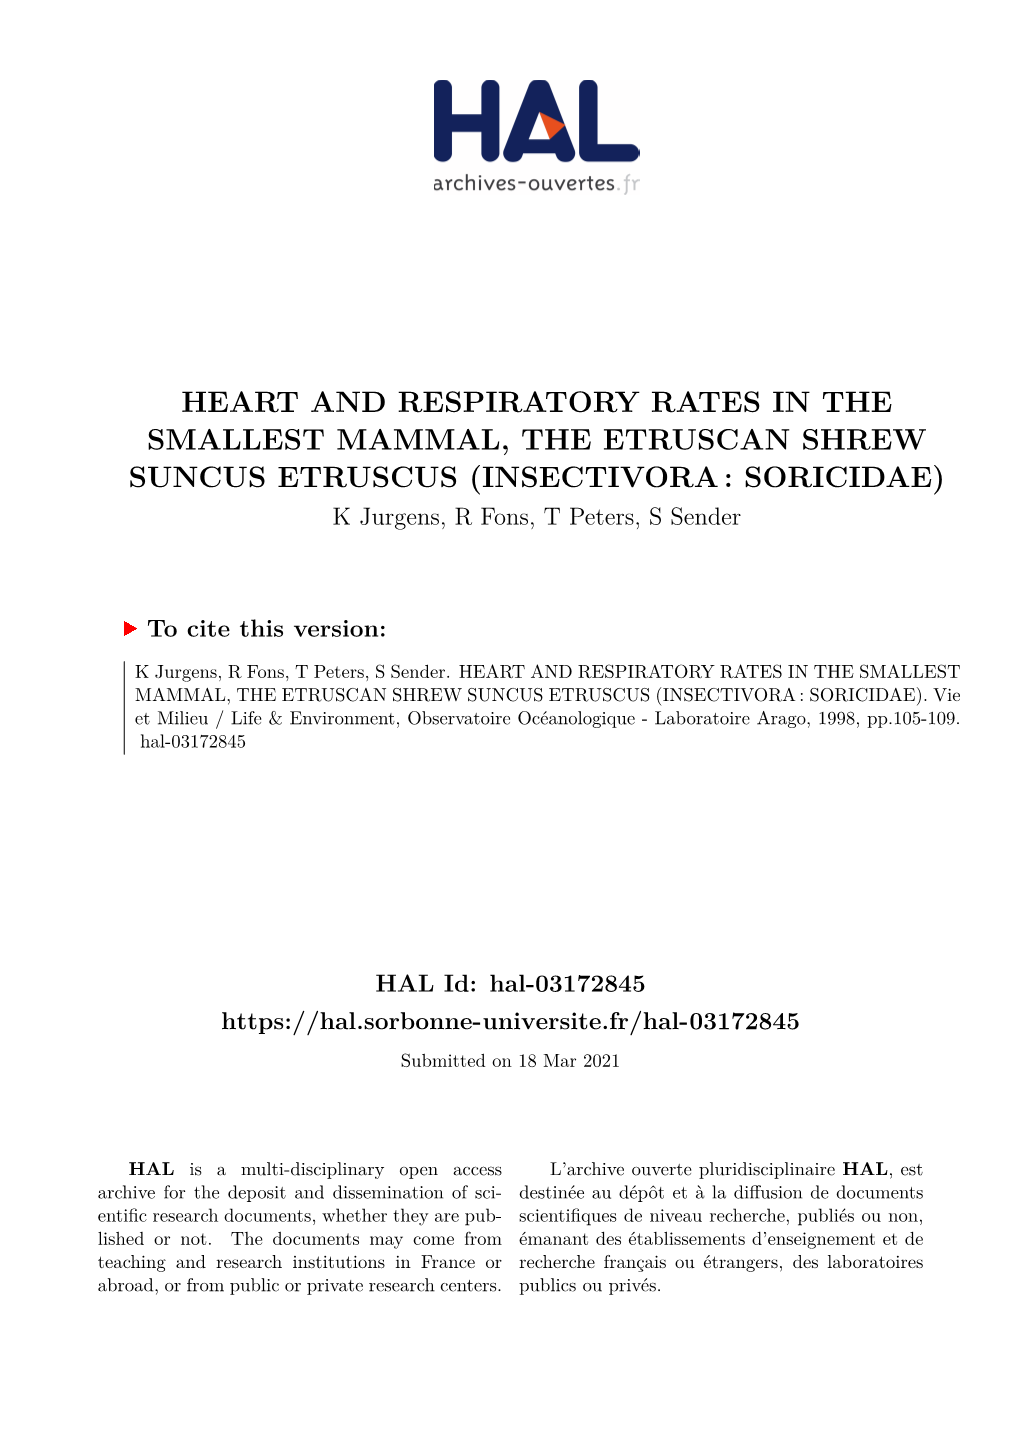 HEART and RESPIRATORY RATES in the SMALLEST MAMMAL, the ETRUSCAN SHREW SUNCUS ETRUSCUS (INSECTIVORA : SORICIDAE) K Jurgens, R Fons, T Peters, S Sender